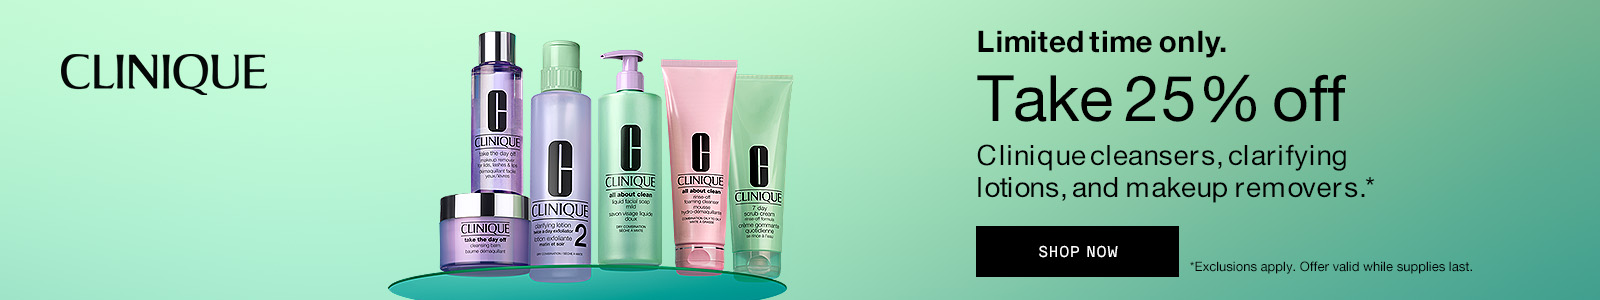 25% Off Clinique Cleansers, Clarifying Lotions, and Makeup Removers